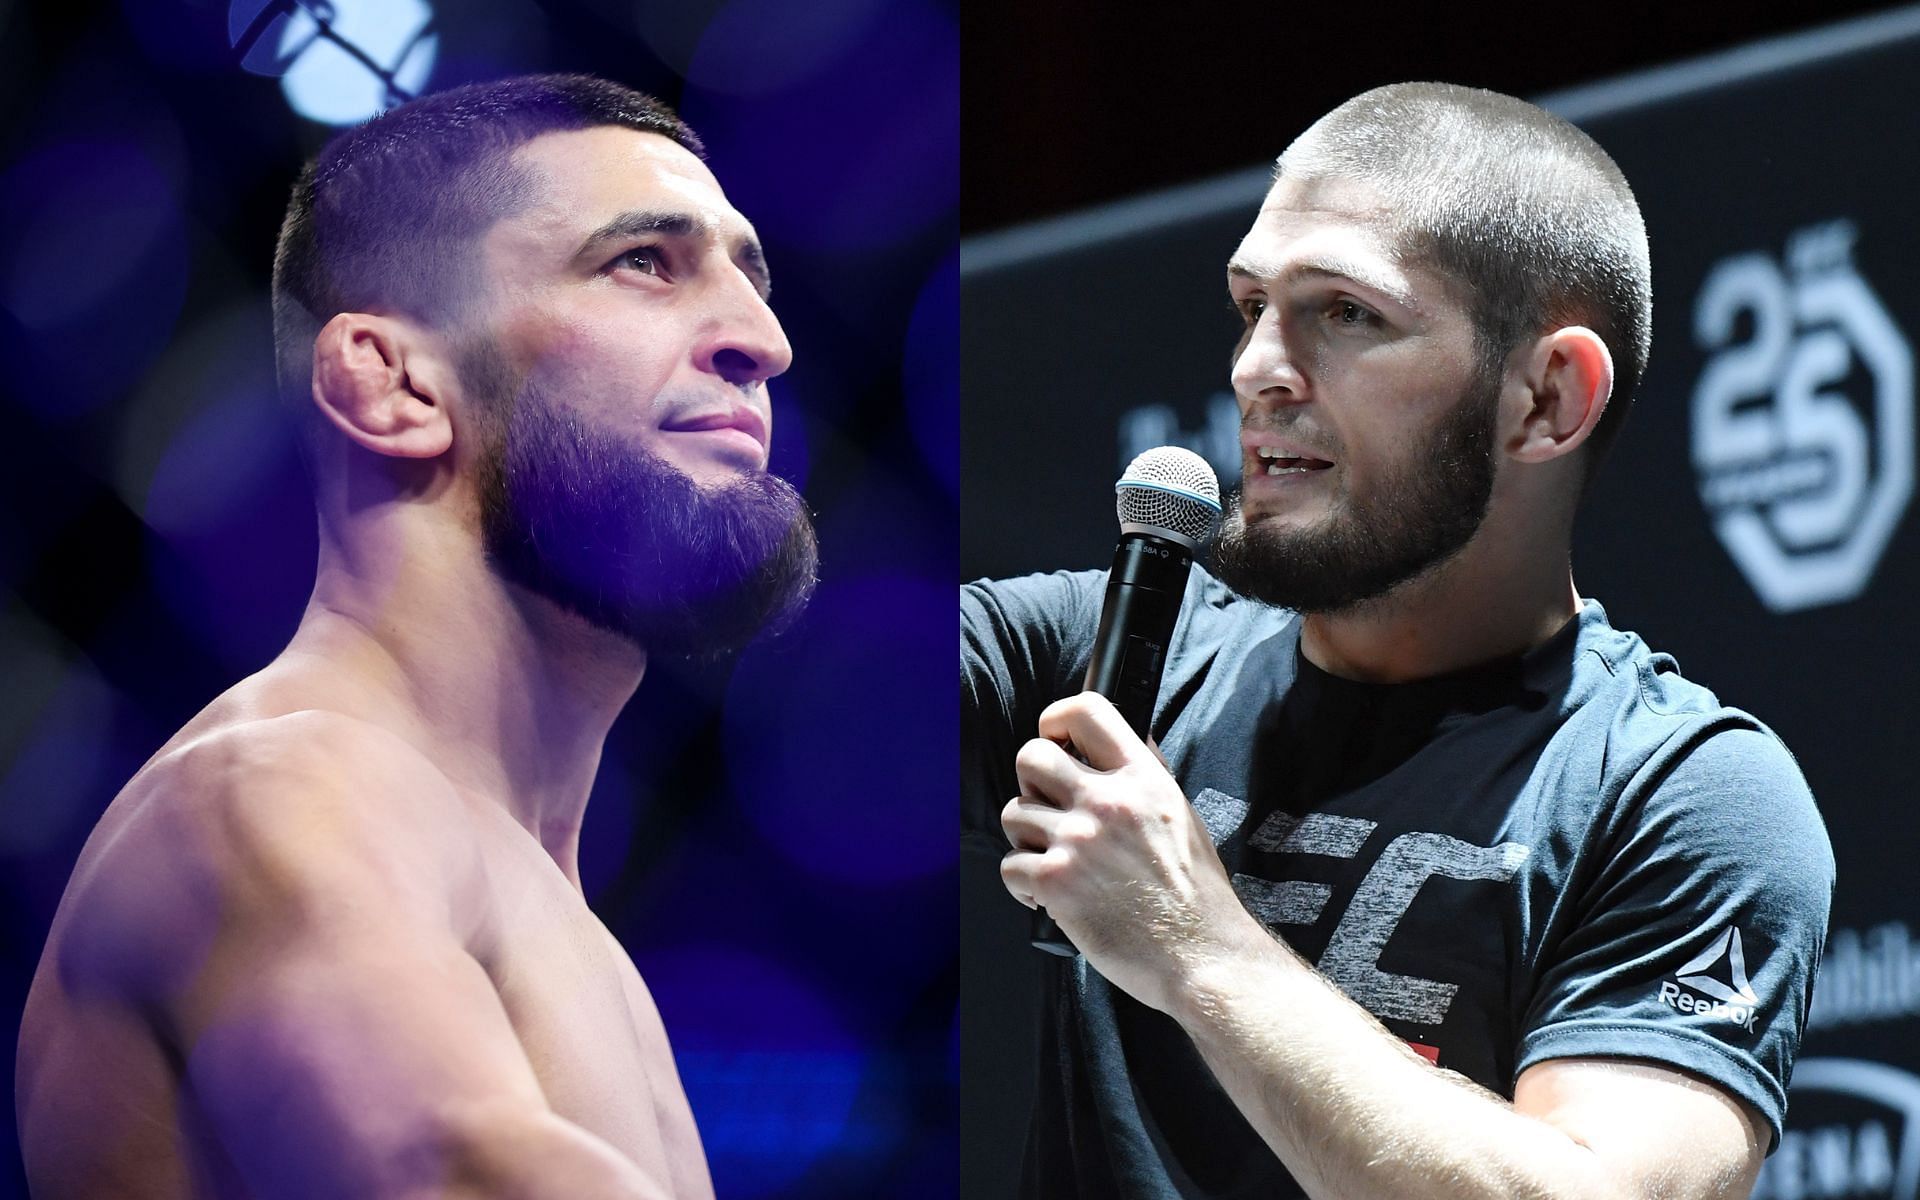 Many consider Khamzat Chimaev (left) and Khabib Nurmagomedov (right) to be among the best grapplers in MMA history [Images courtesy: Getty Images]